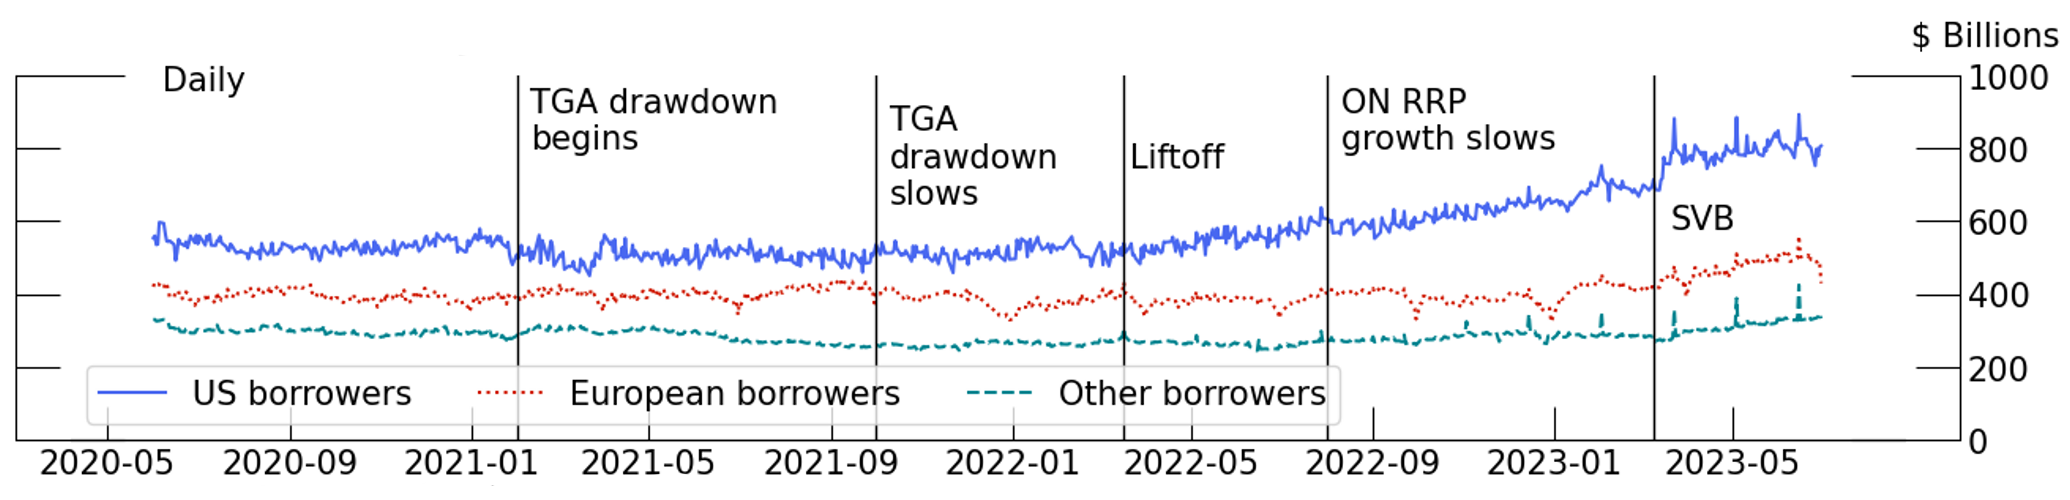 Figure 4. Non-ON RRP Tri-Party Repo Transaction Volume by Borrower. See accessible link for data.